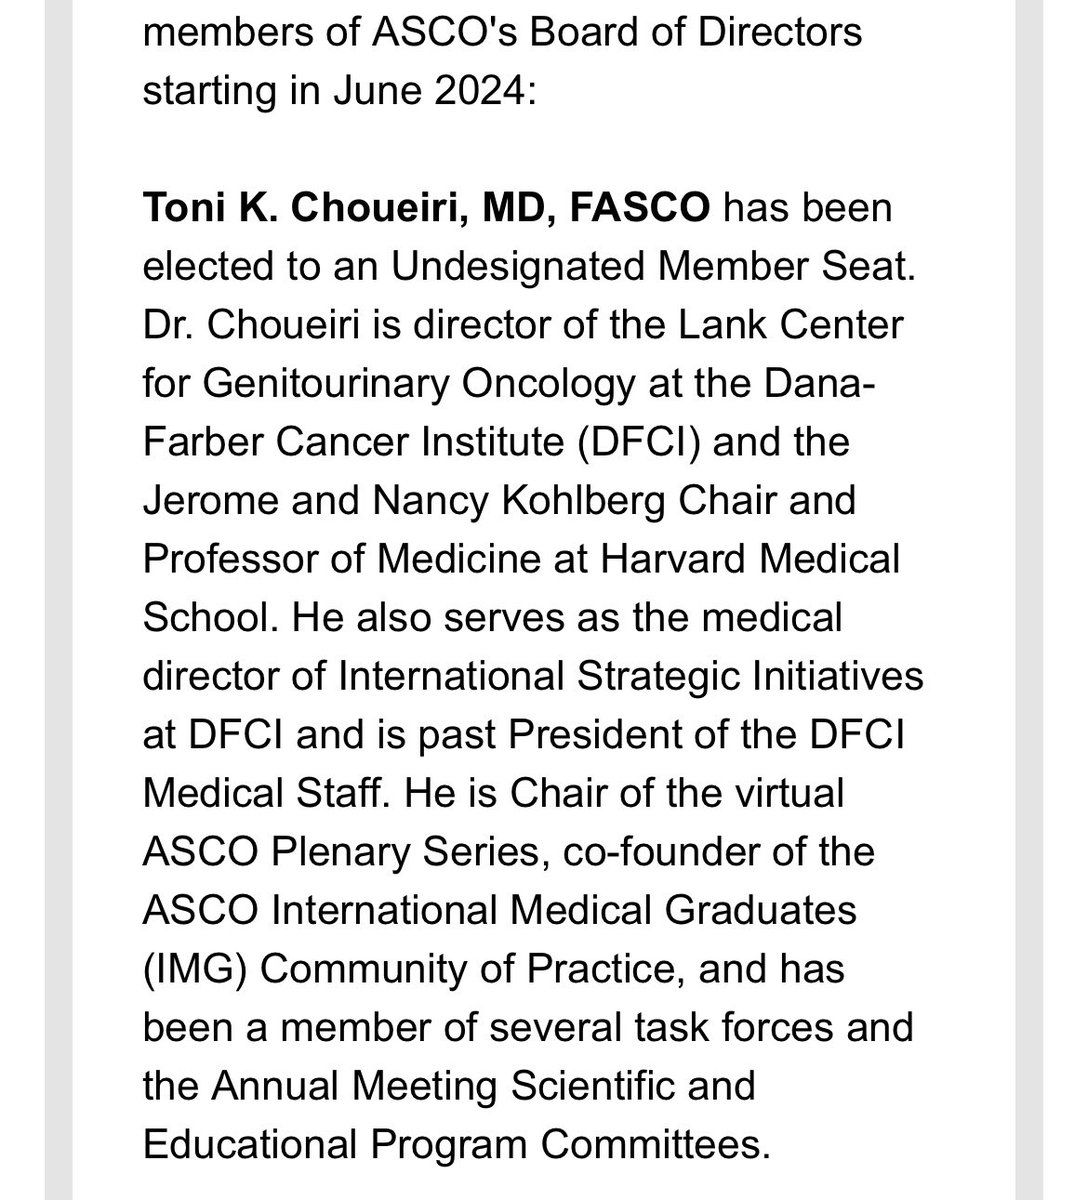 ASCO Election News. Congratulations to @DrChoueiri on election to ASCO board of directors. Will be an important new voice in many regards! 👏👏👏 @ASCO